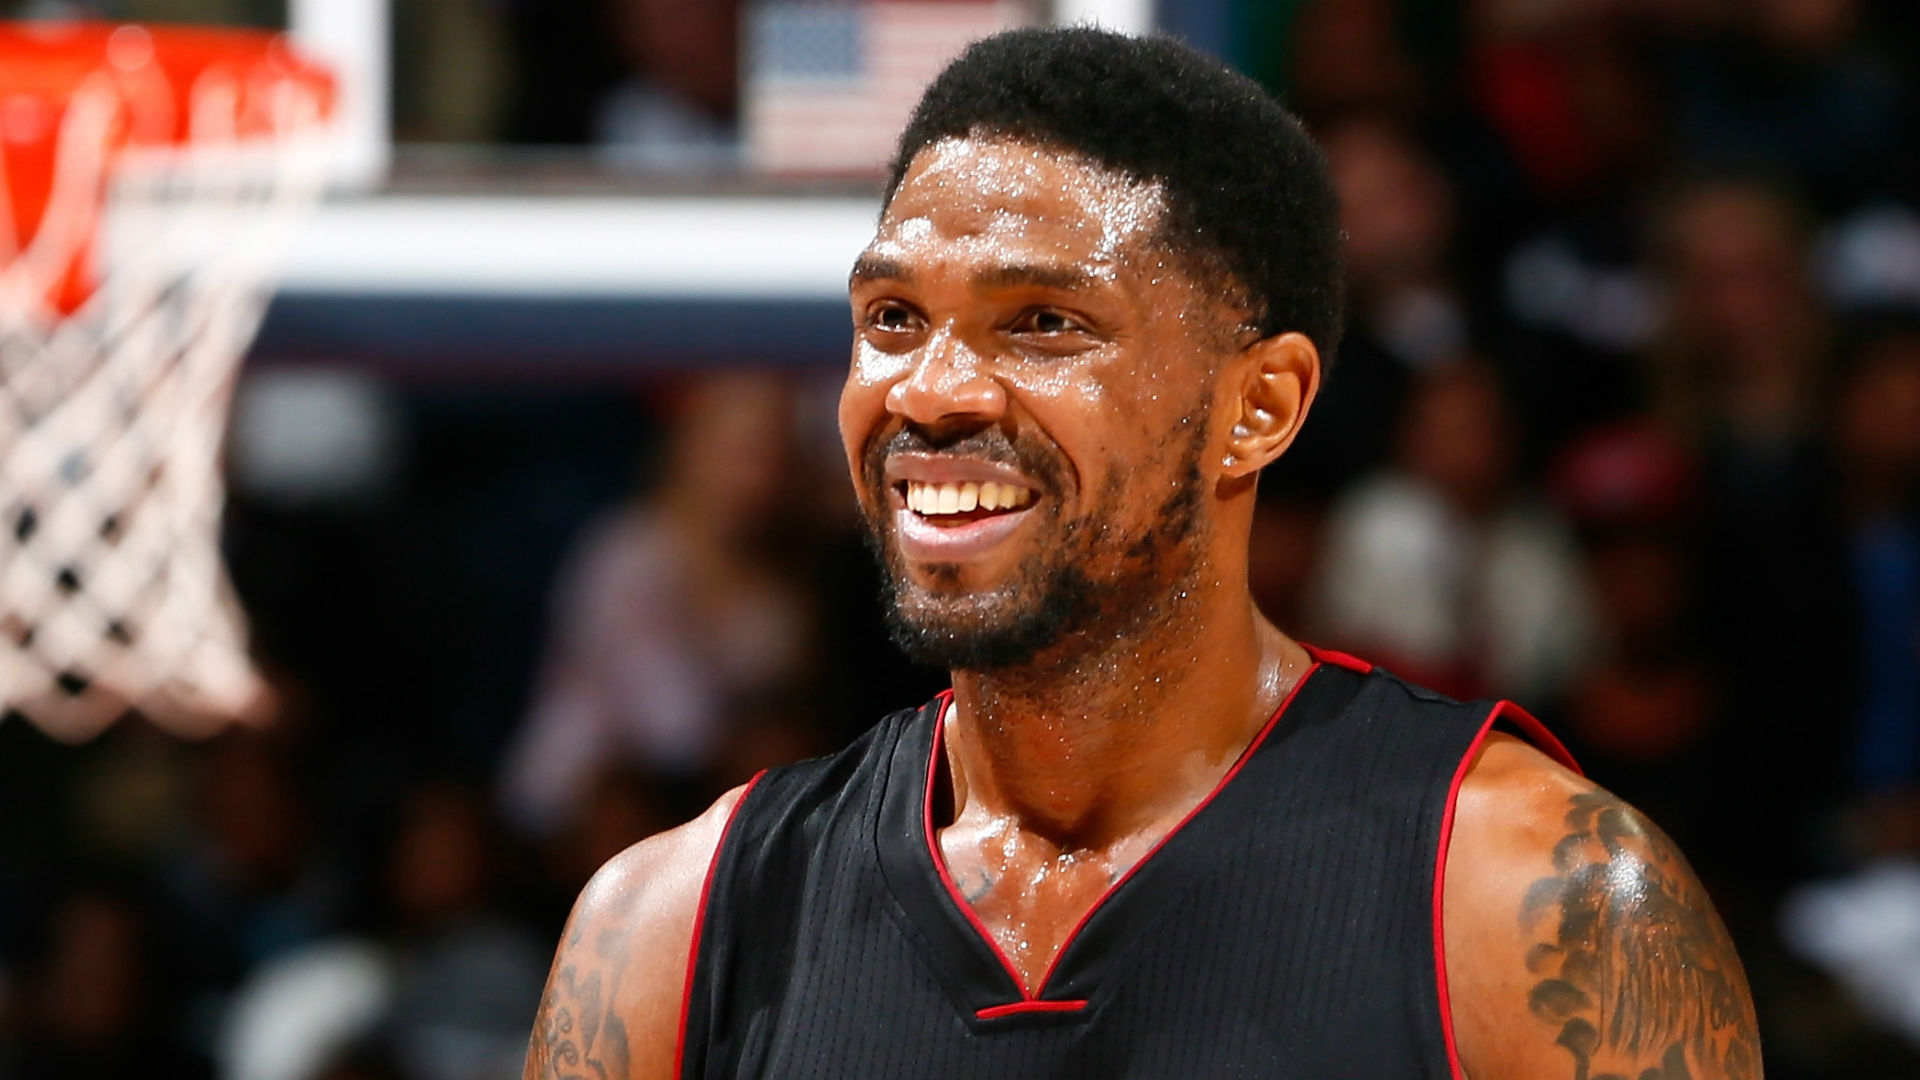 Udonis Haslem re-signs with Heat for 16th season | Sporting News1920 x 1080